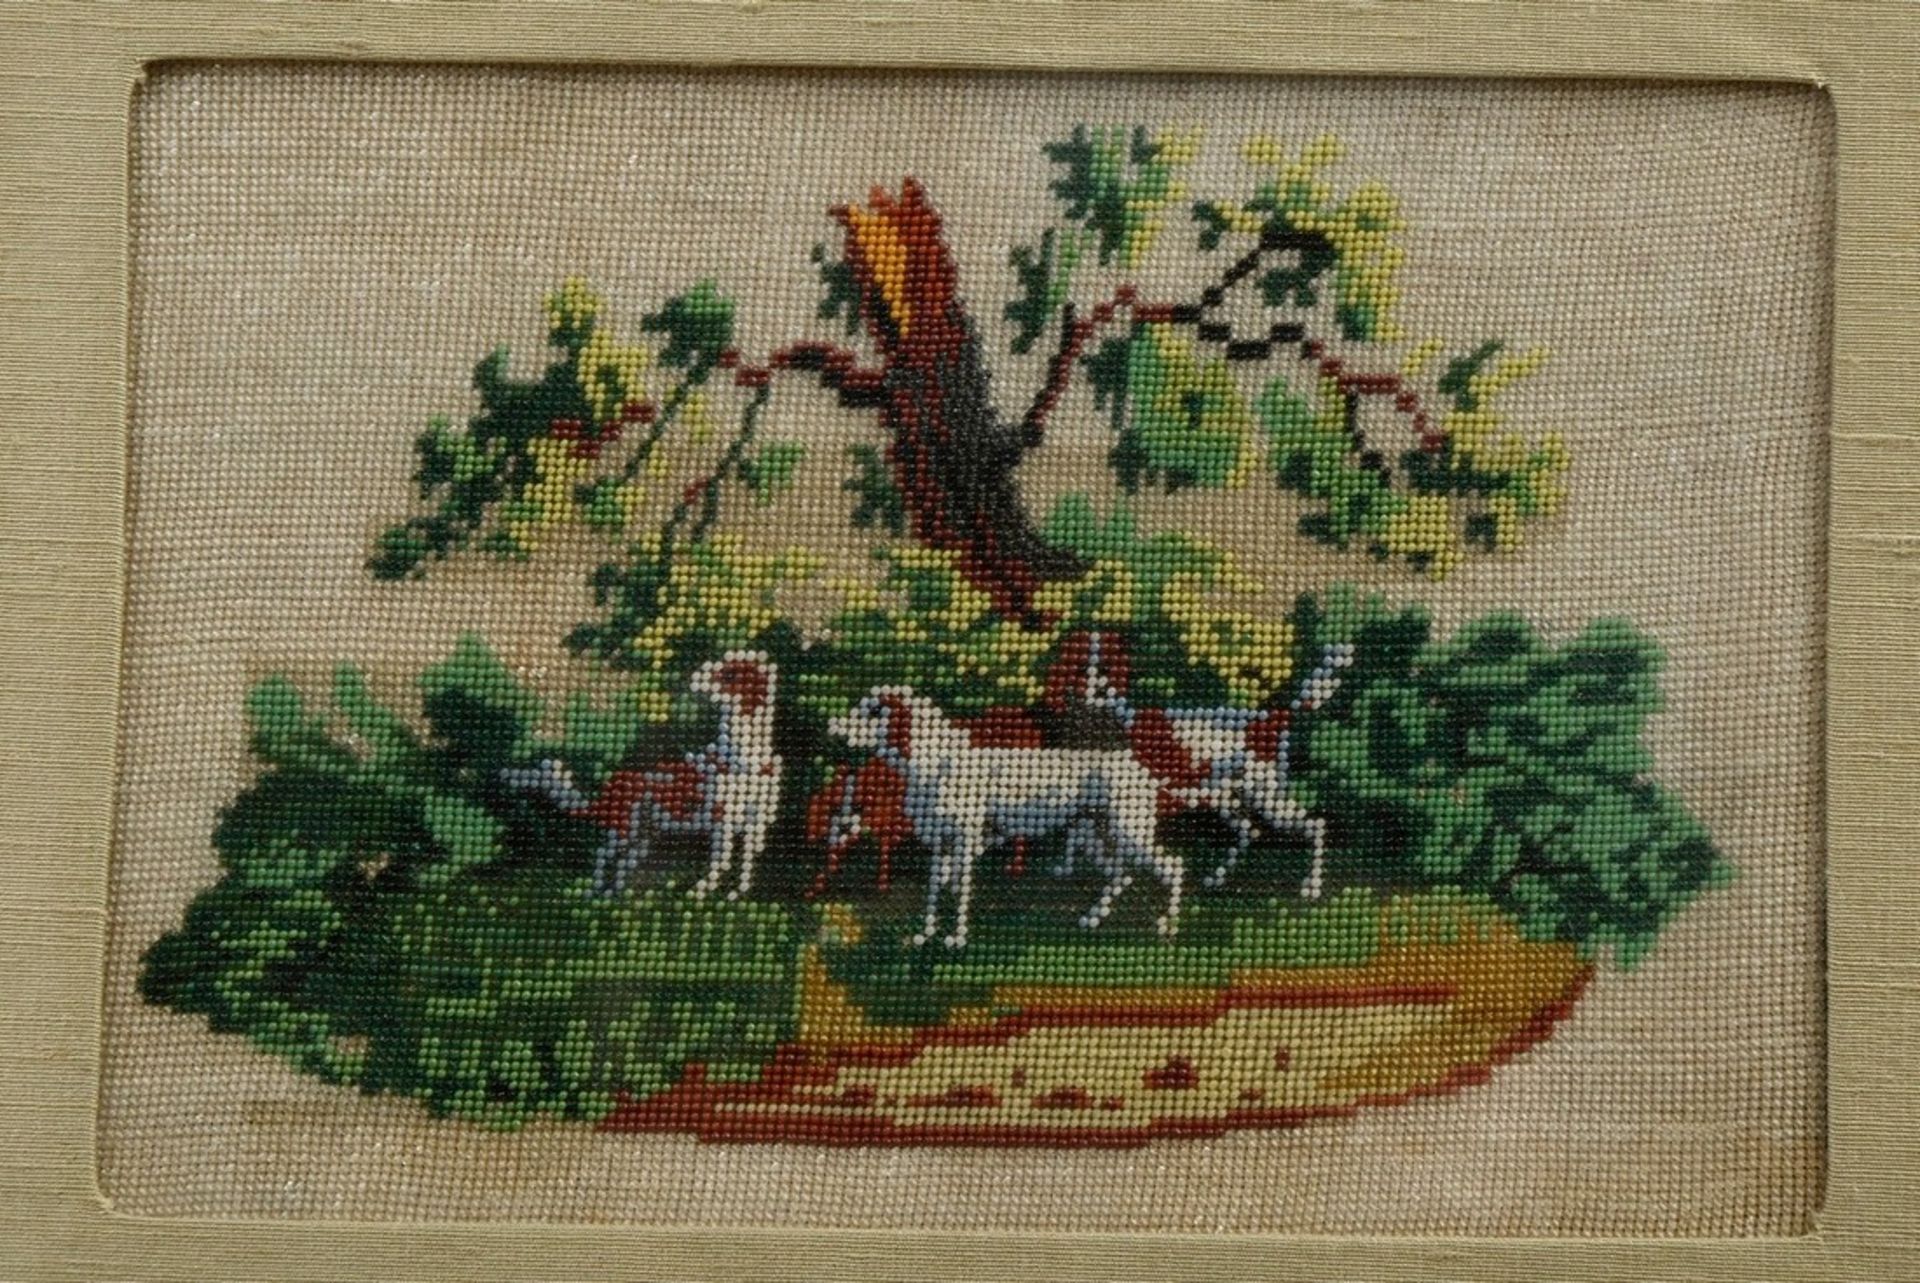 2 Fine pearl embroidery pictures "Hunting dog pack under tree" and "Seascape with buildings", proba - Image 5 of 5